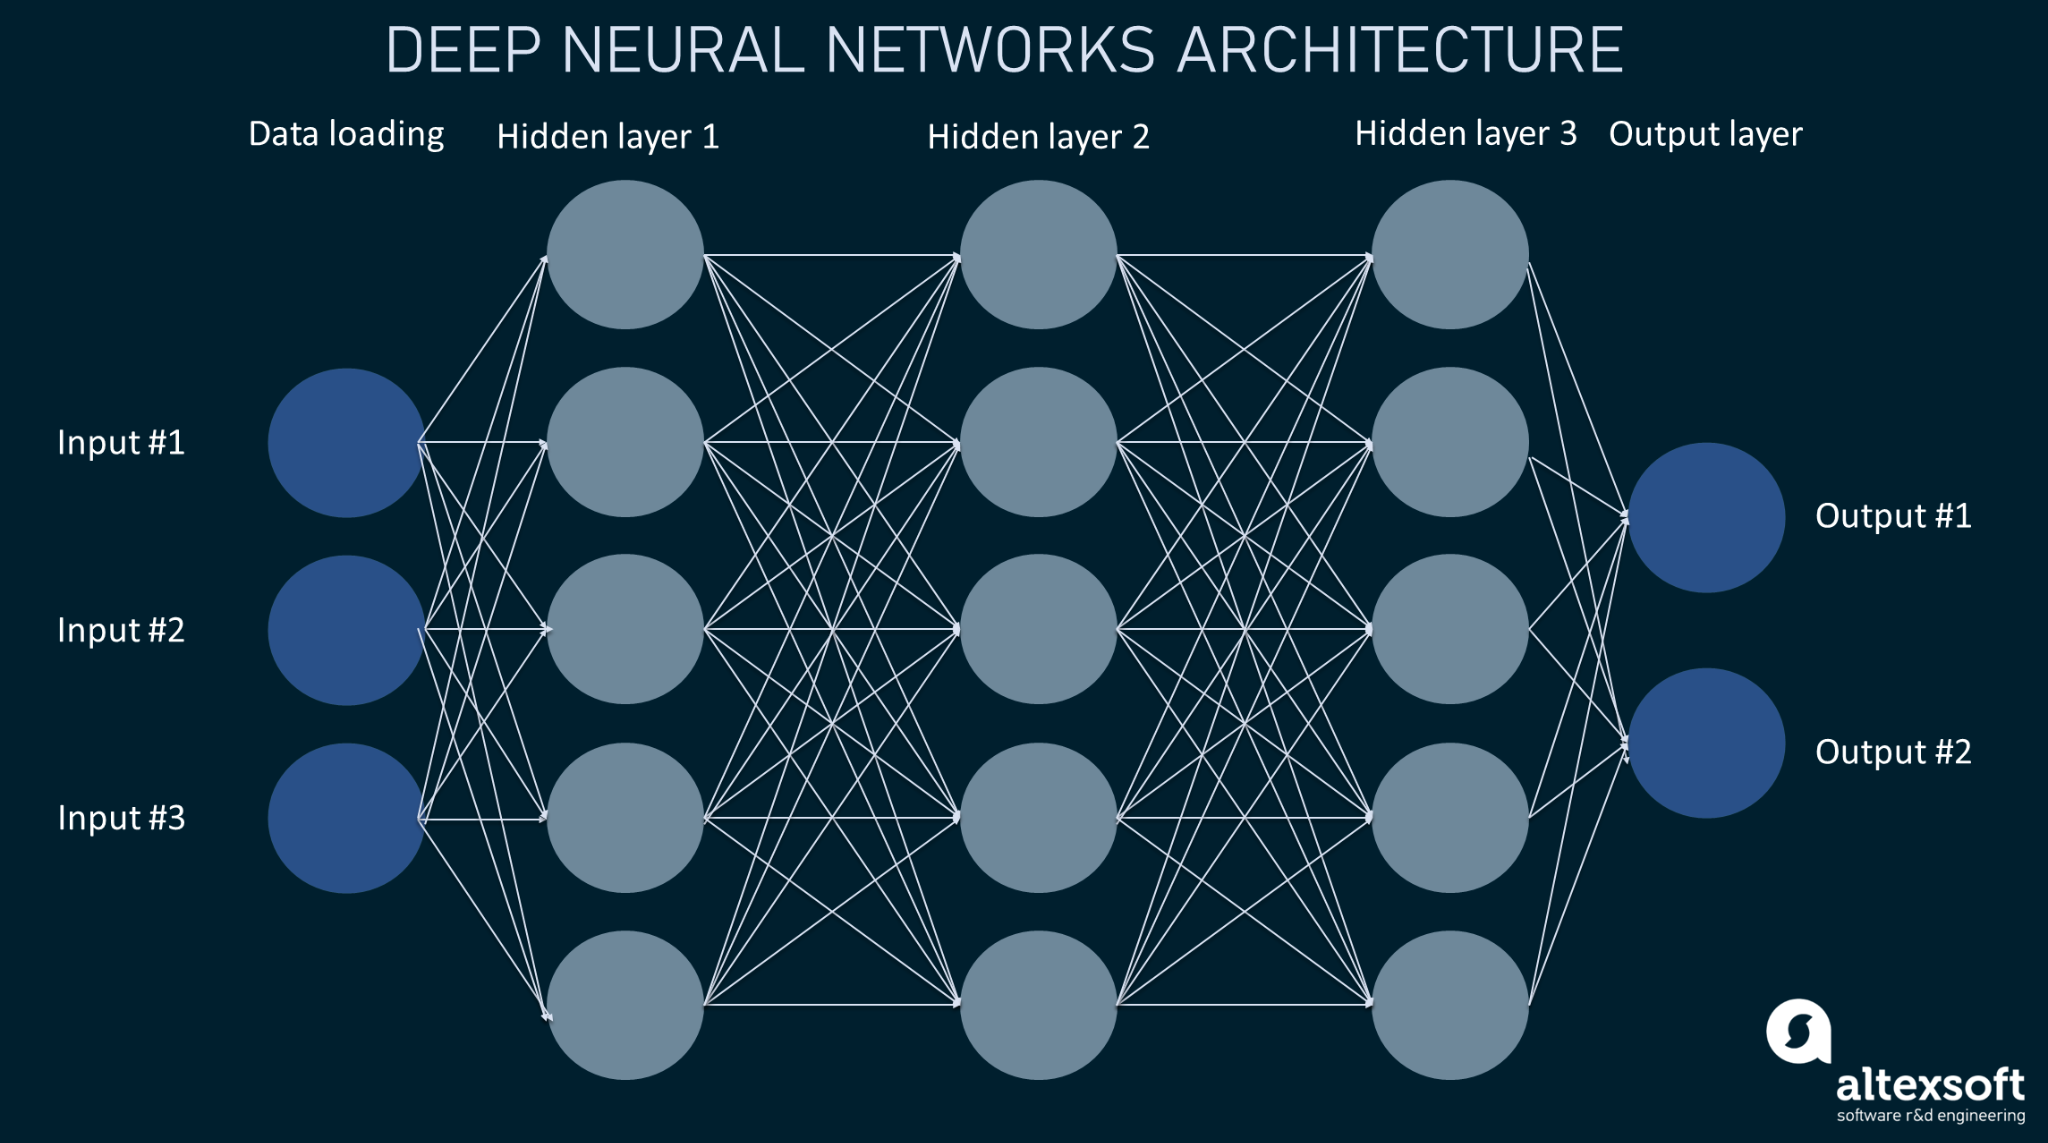 Deep neural networks architecture